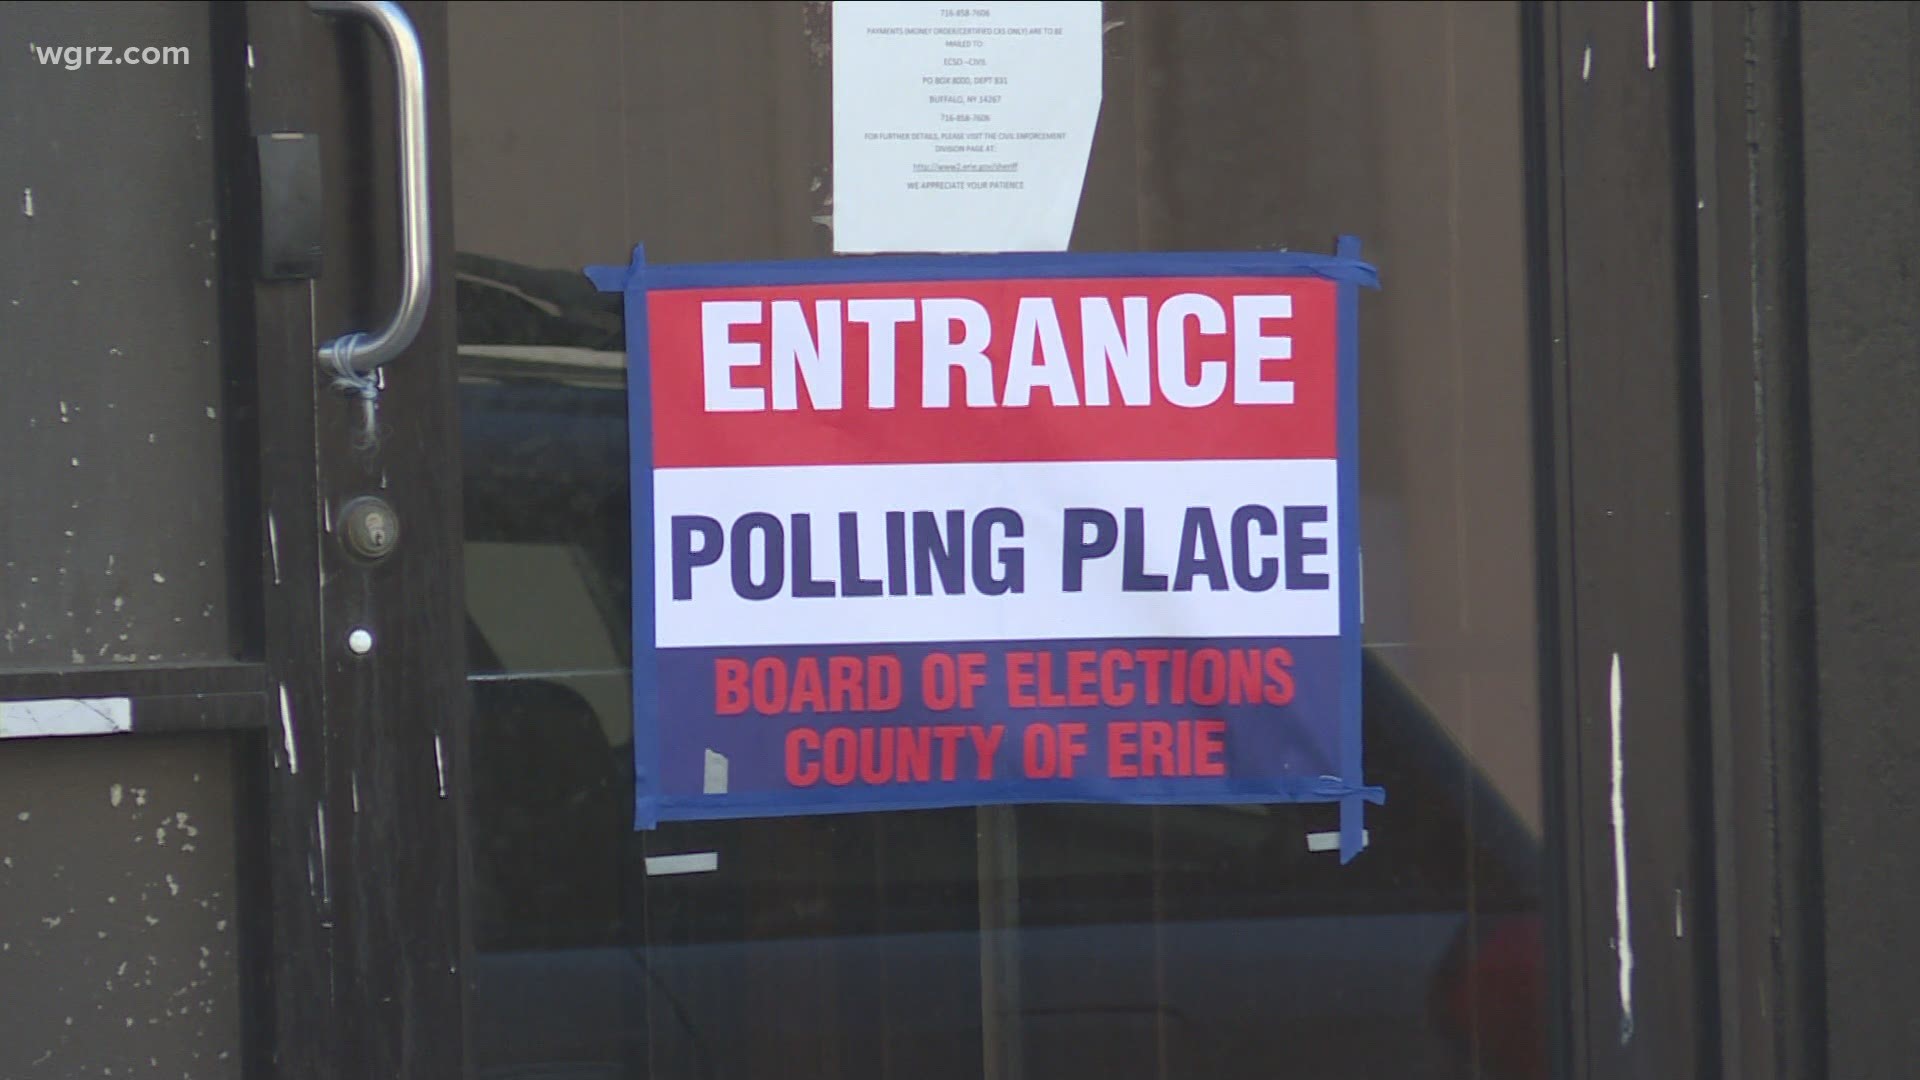 Early voting is officially underway at sites all across Western New York for the June 22 primary.